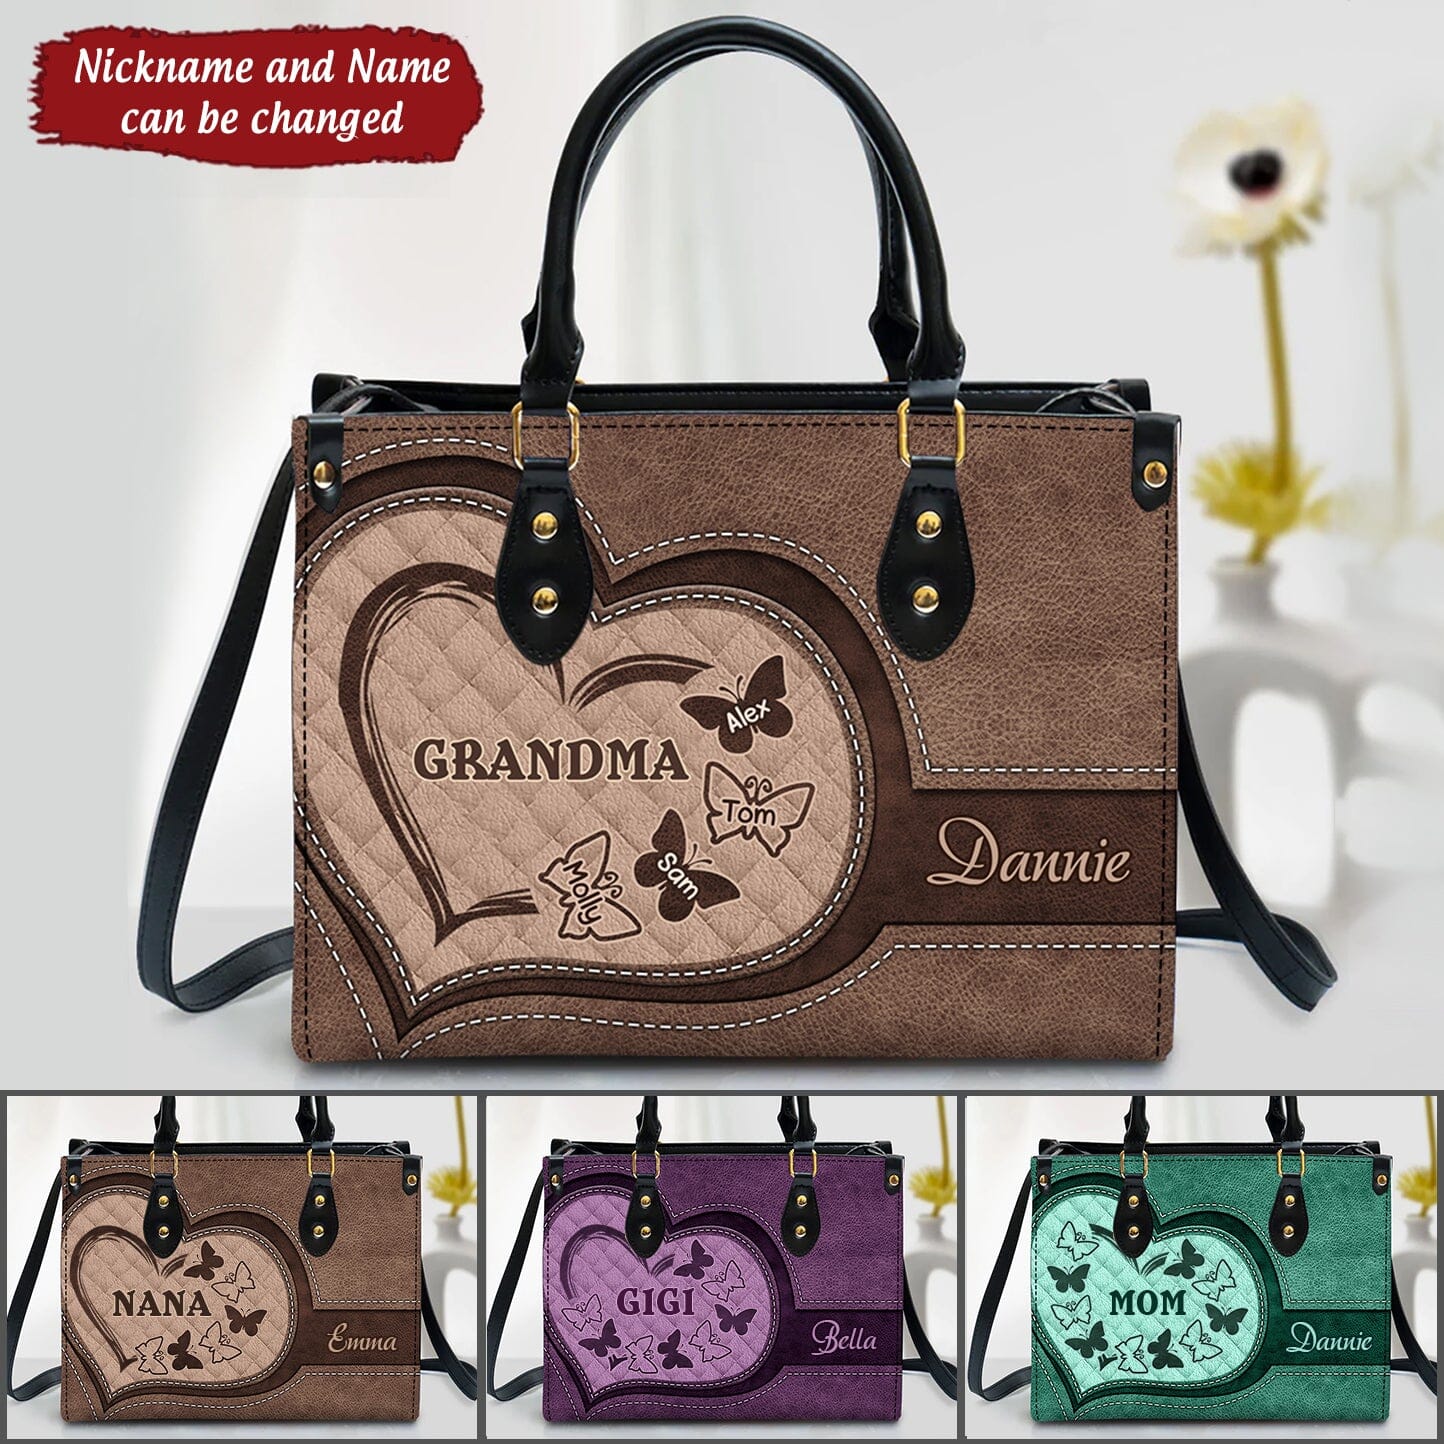 Customized Grandma Mom Heart Butterfly Custom Nickname Names Mothers Day Familia Gift Leather Handbag HLD23JUL22TT2 Leather Handbag Humancustom - Unique Personalized Gifts Black 